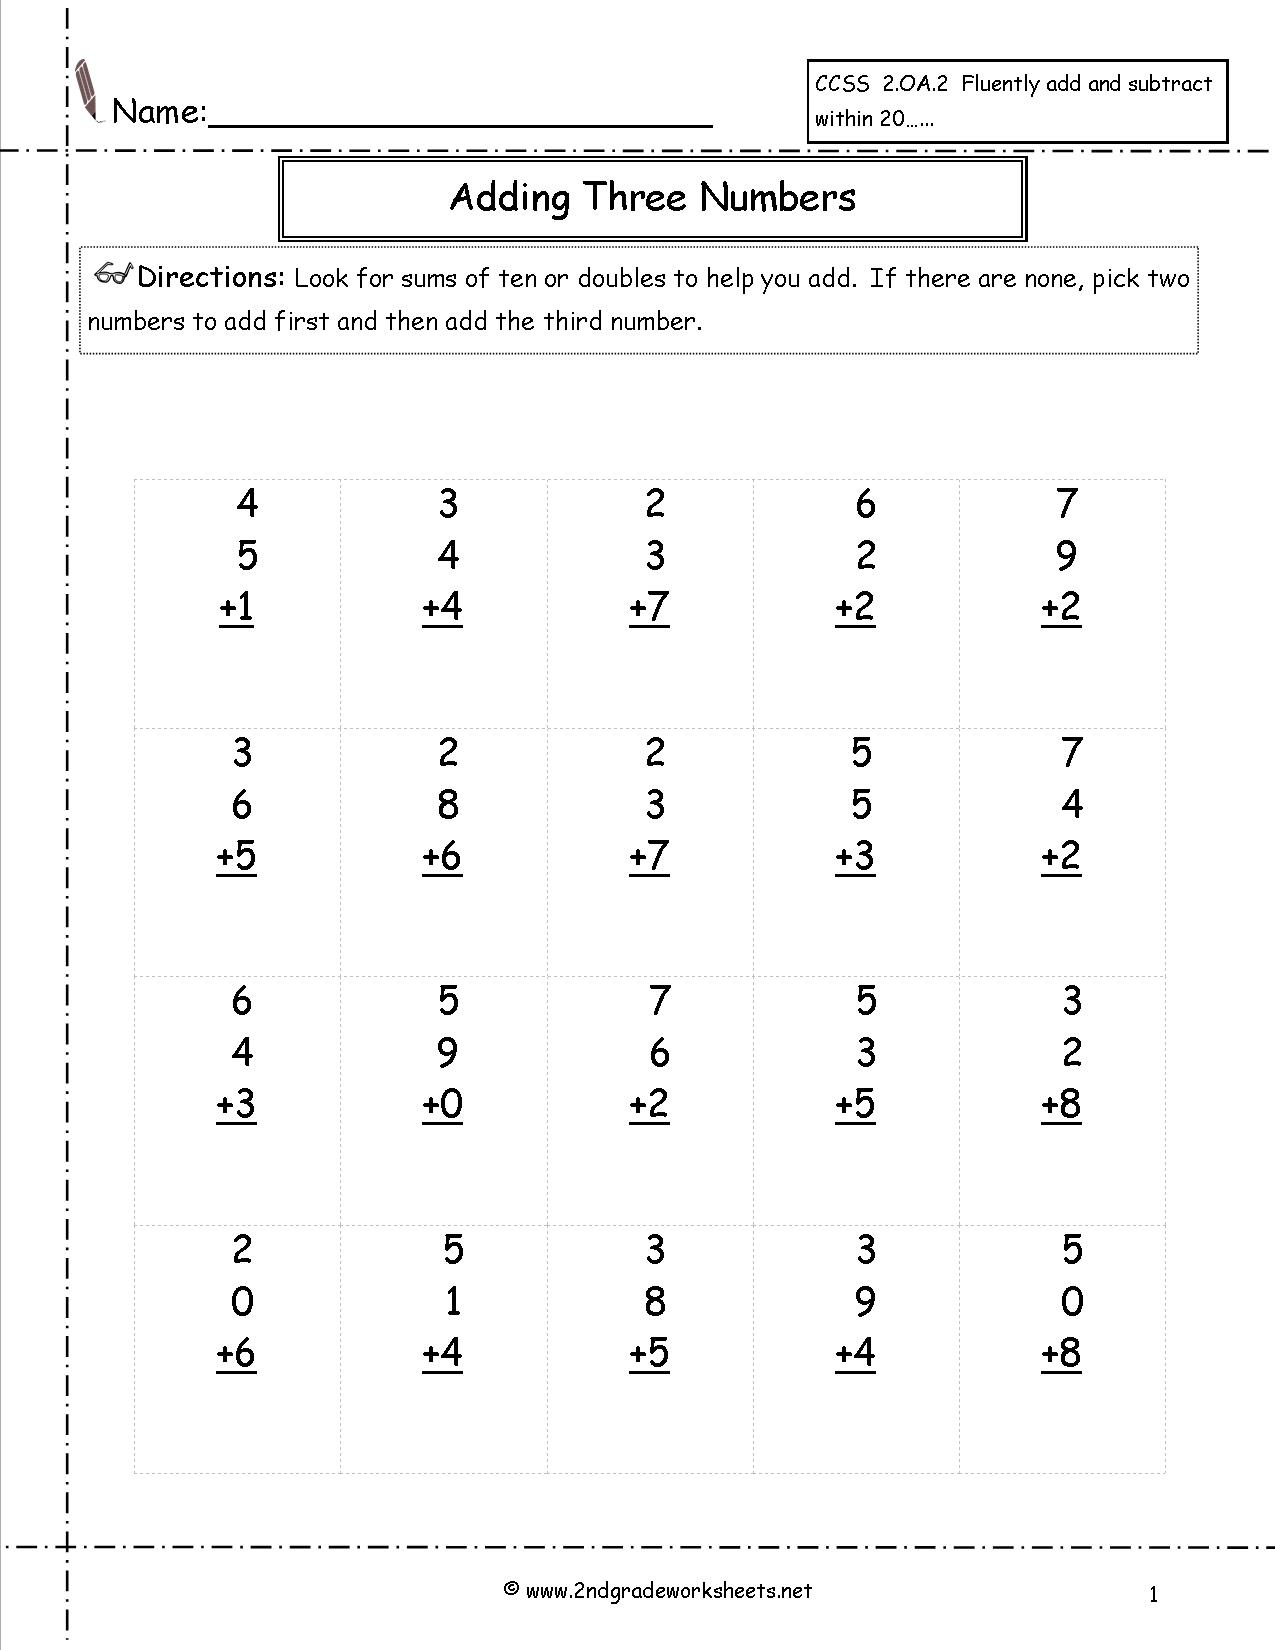 Free Math Worksheets And Printouts | Math Worksheets For Teachers Printable